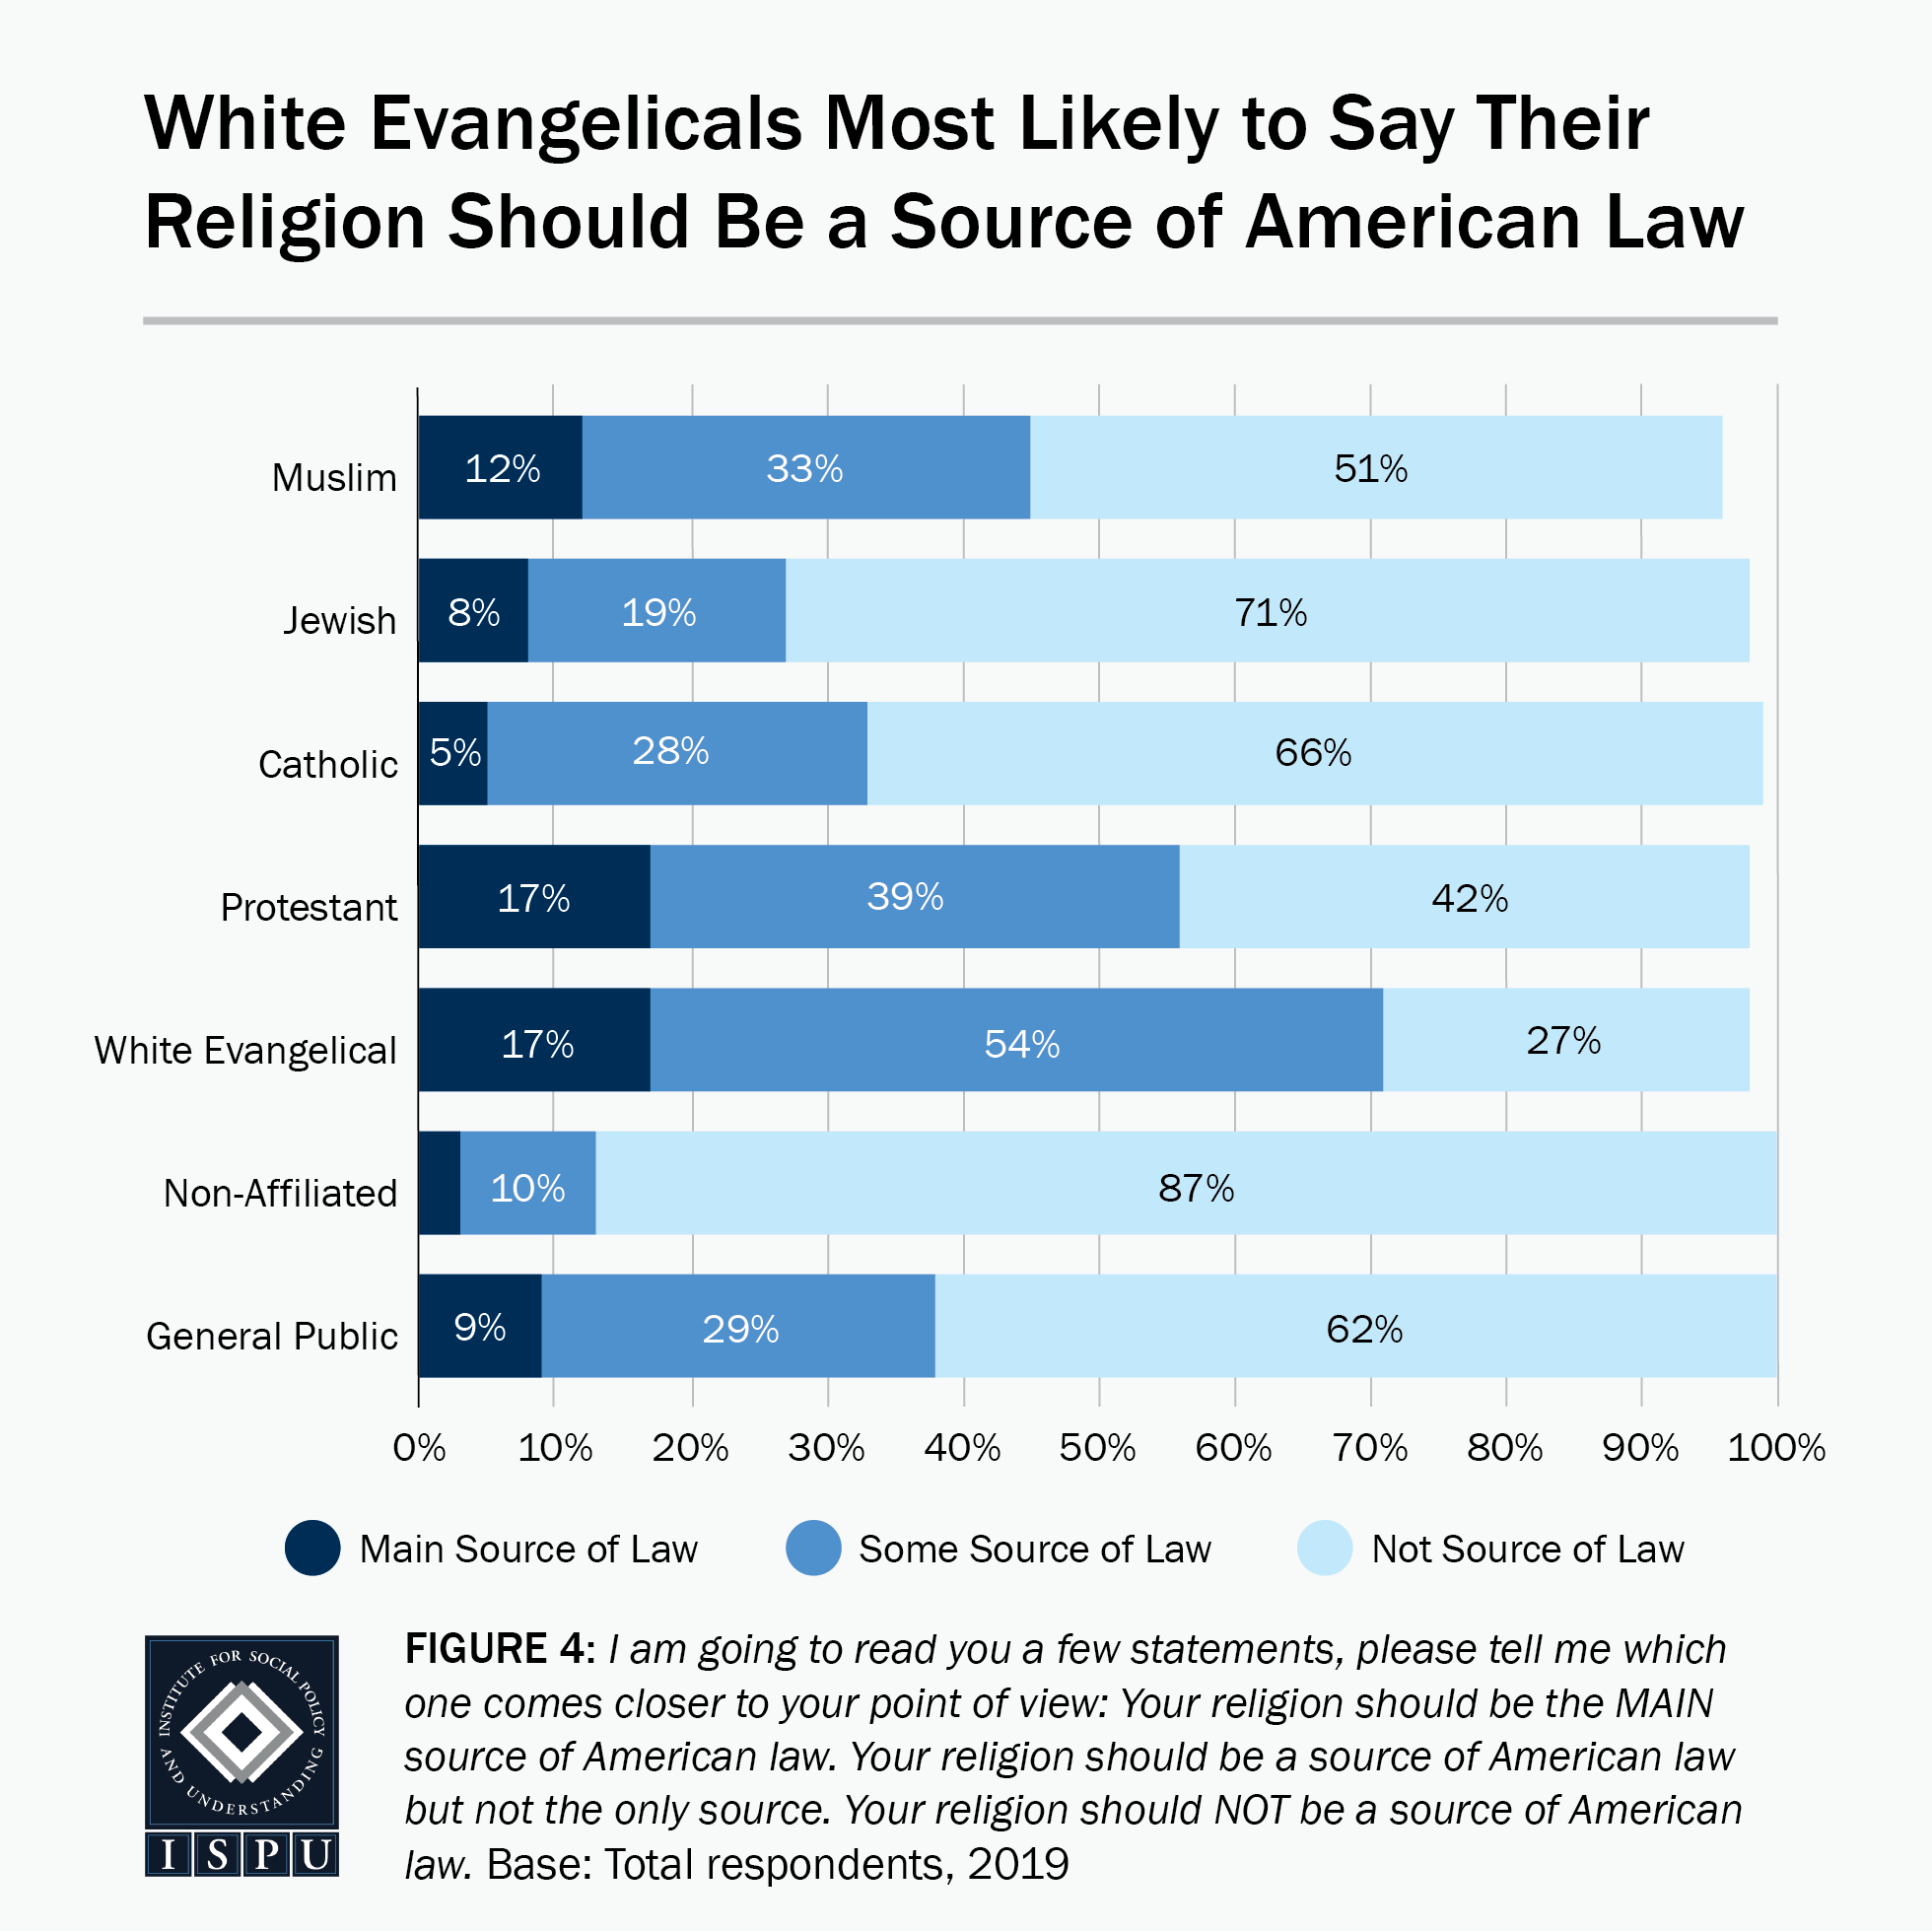 Figure 4: A bar graph showing that white Evangelicals are the most likely faith group to say their religion should be a source of American law